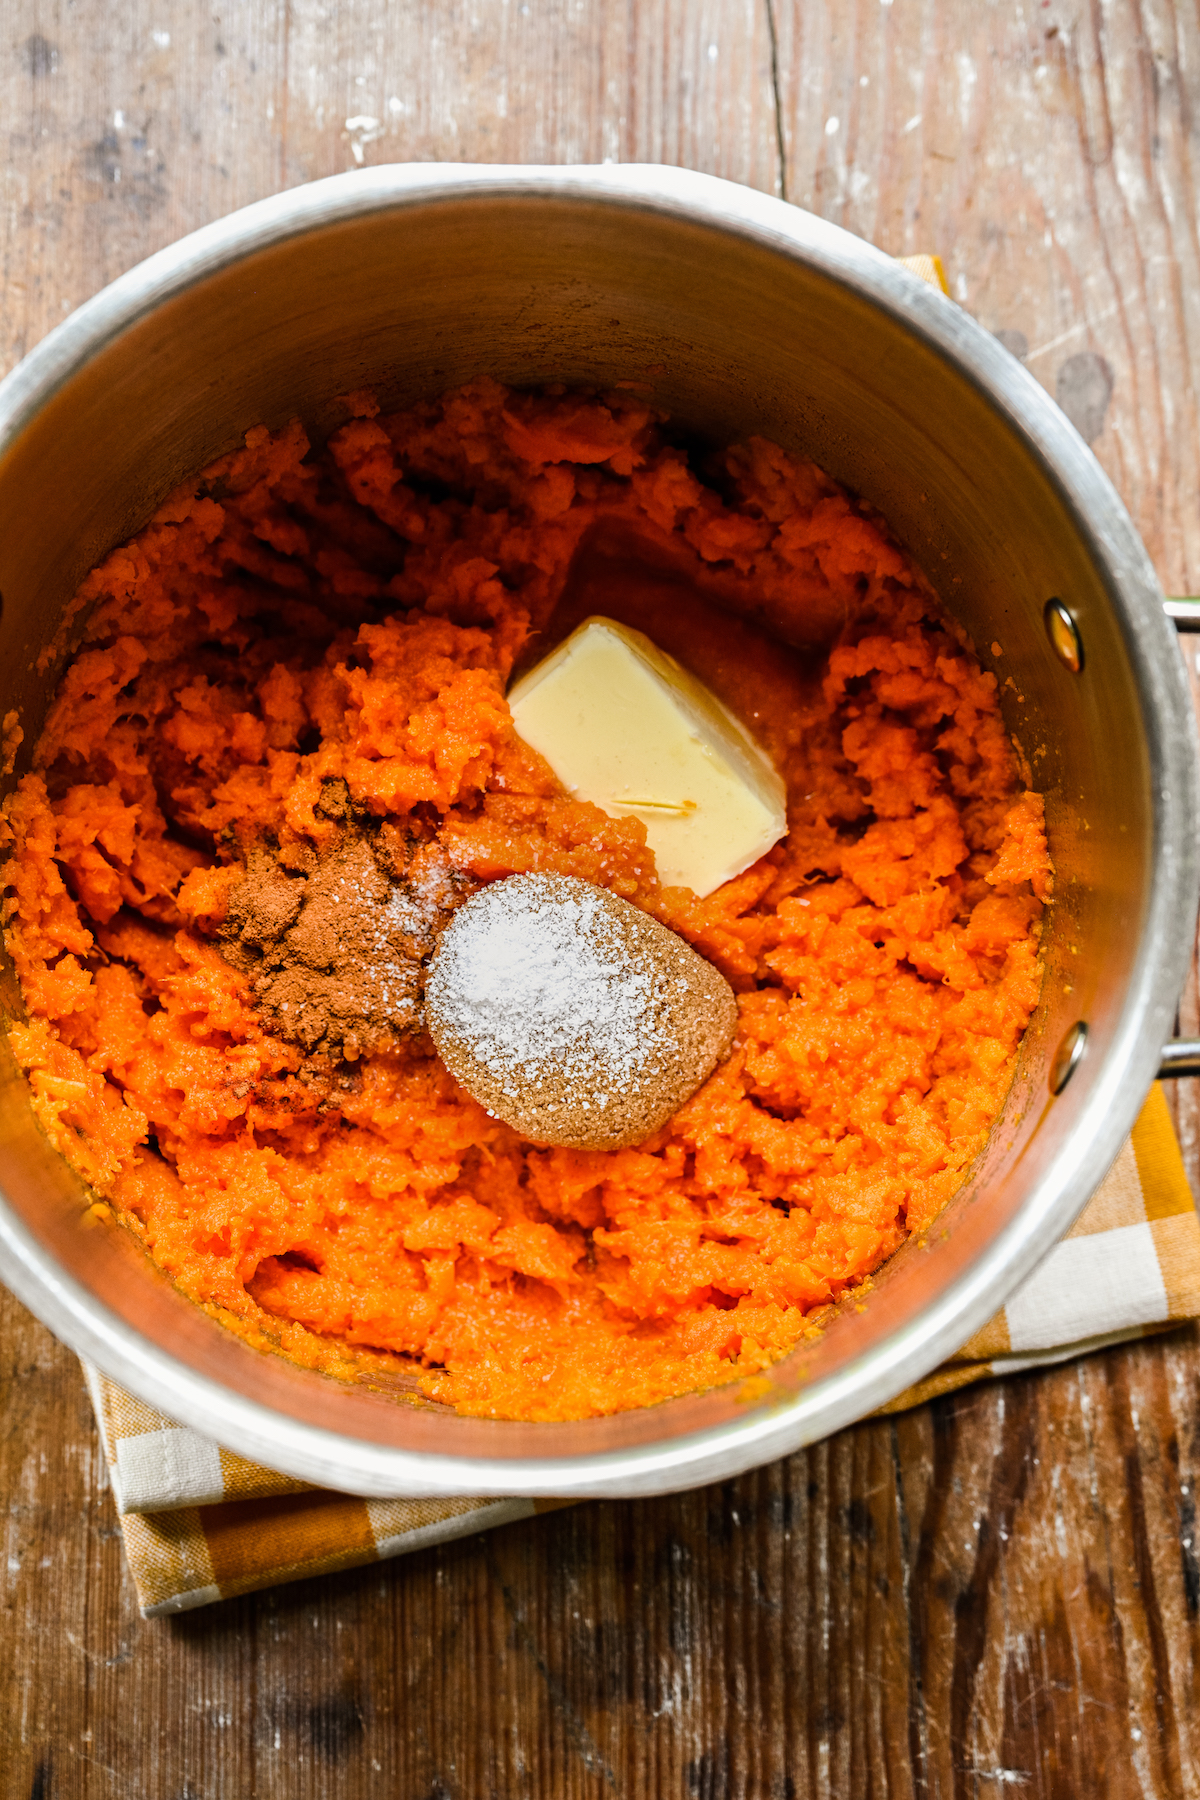 A pot of mashed sweet potatoes with brown sugar, salt, butter, and cinnamon added.